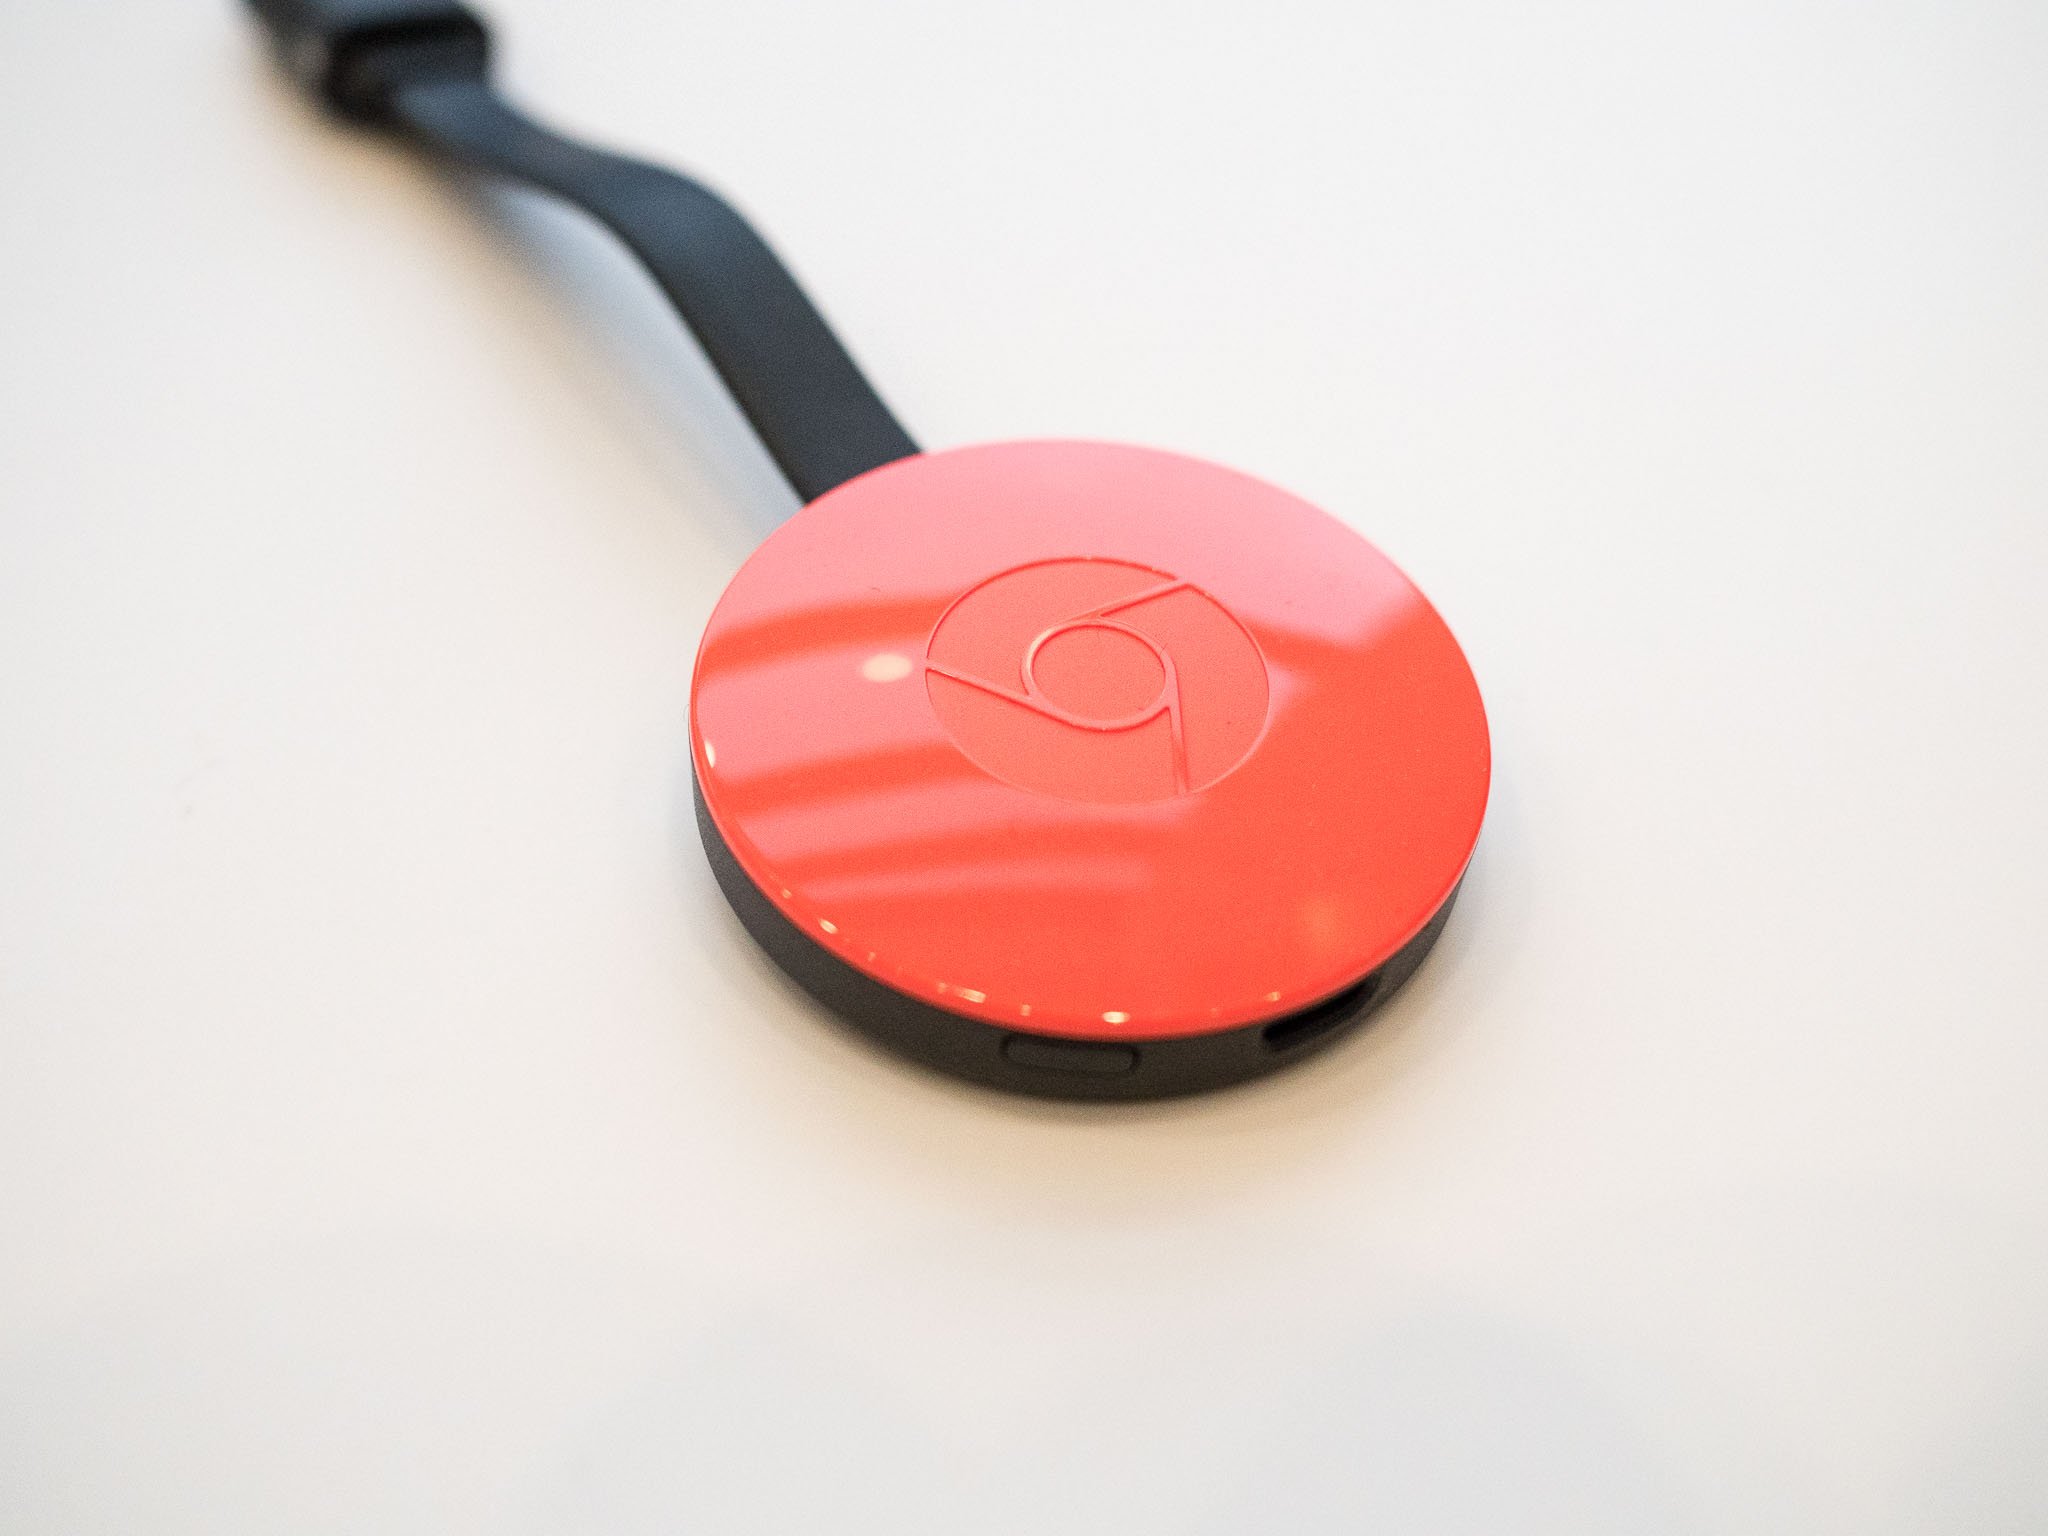 Google reportedly working with Vizio to build Chromecast features into TVs